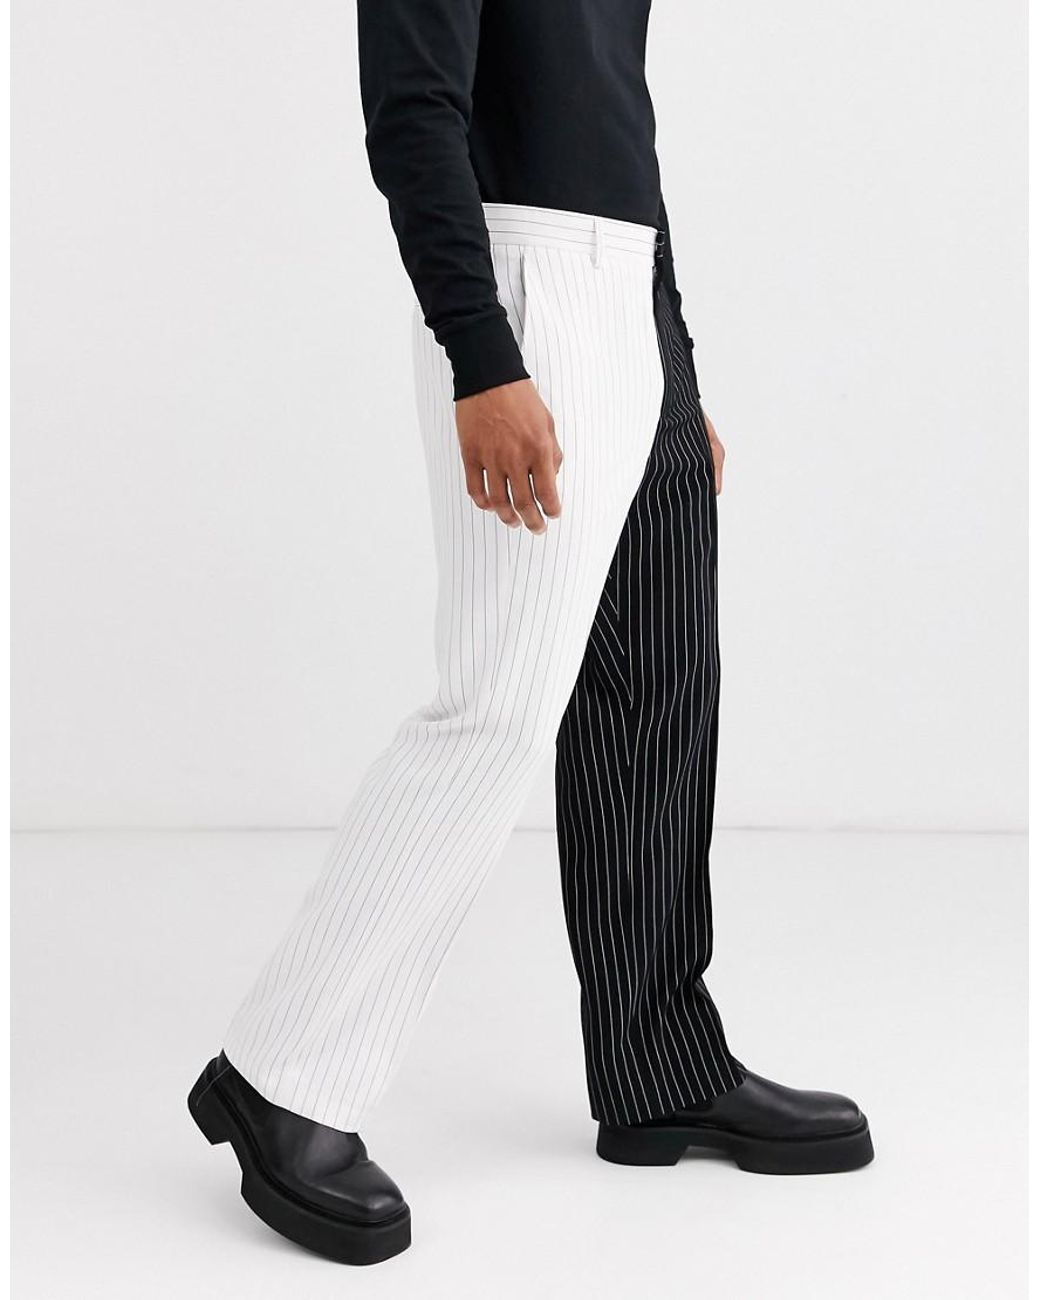 Jaded London Spliced Black And White Pinstripe Suit Pant for Men